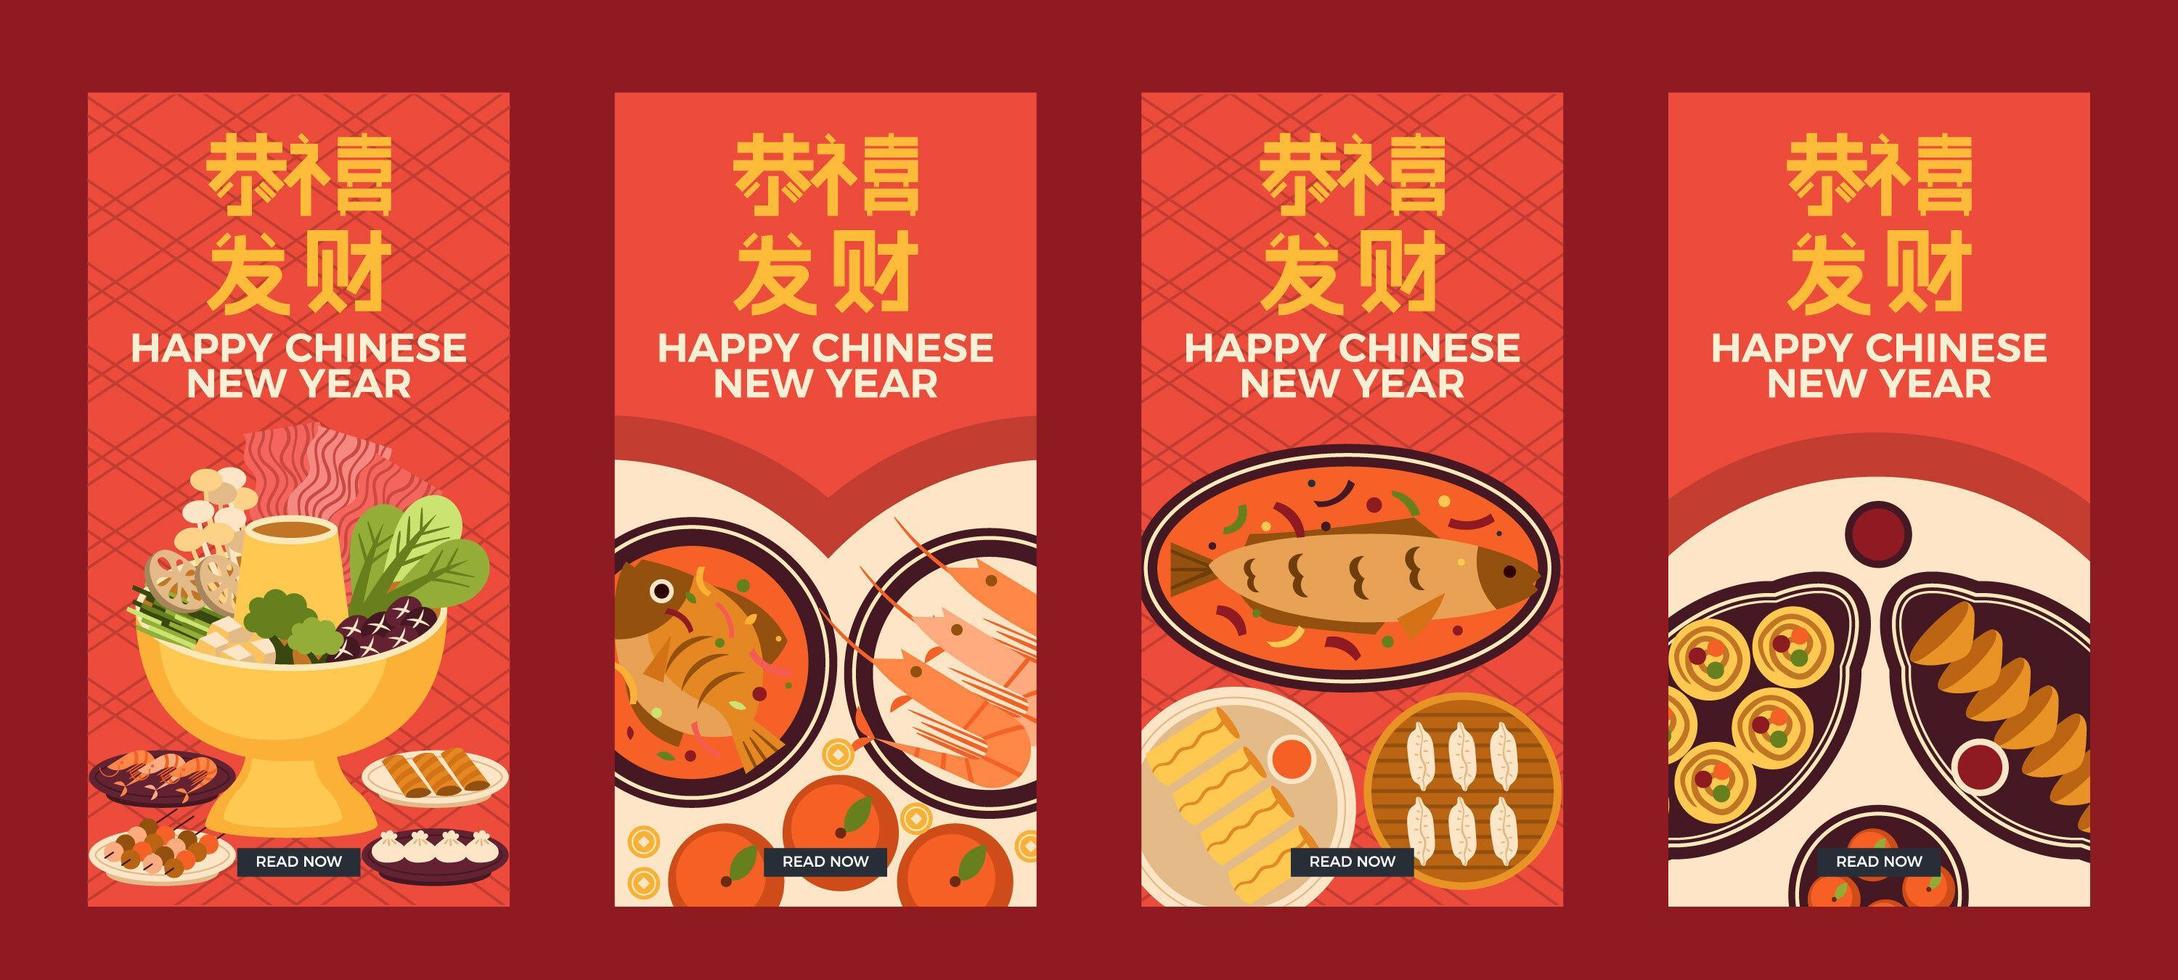 Social Media Story Post for Chinese New Year vector